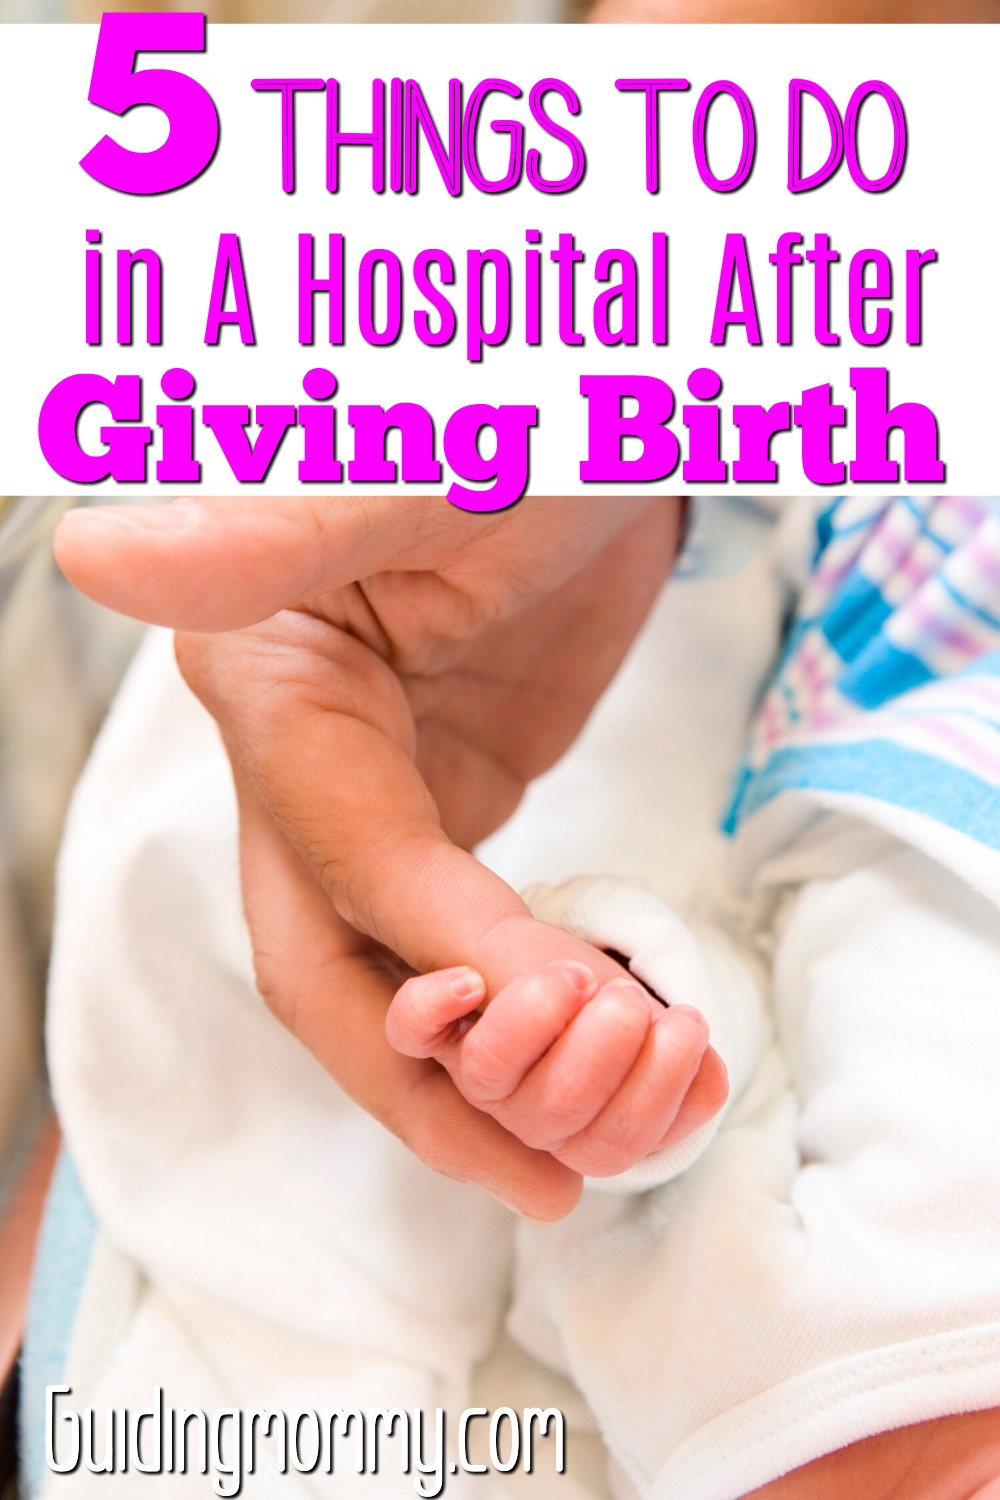 Things to do in a hospital after giving birth